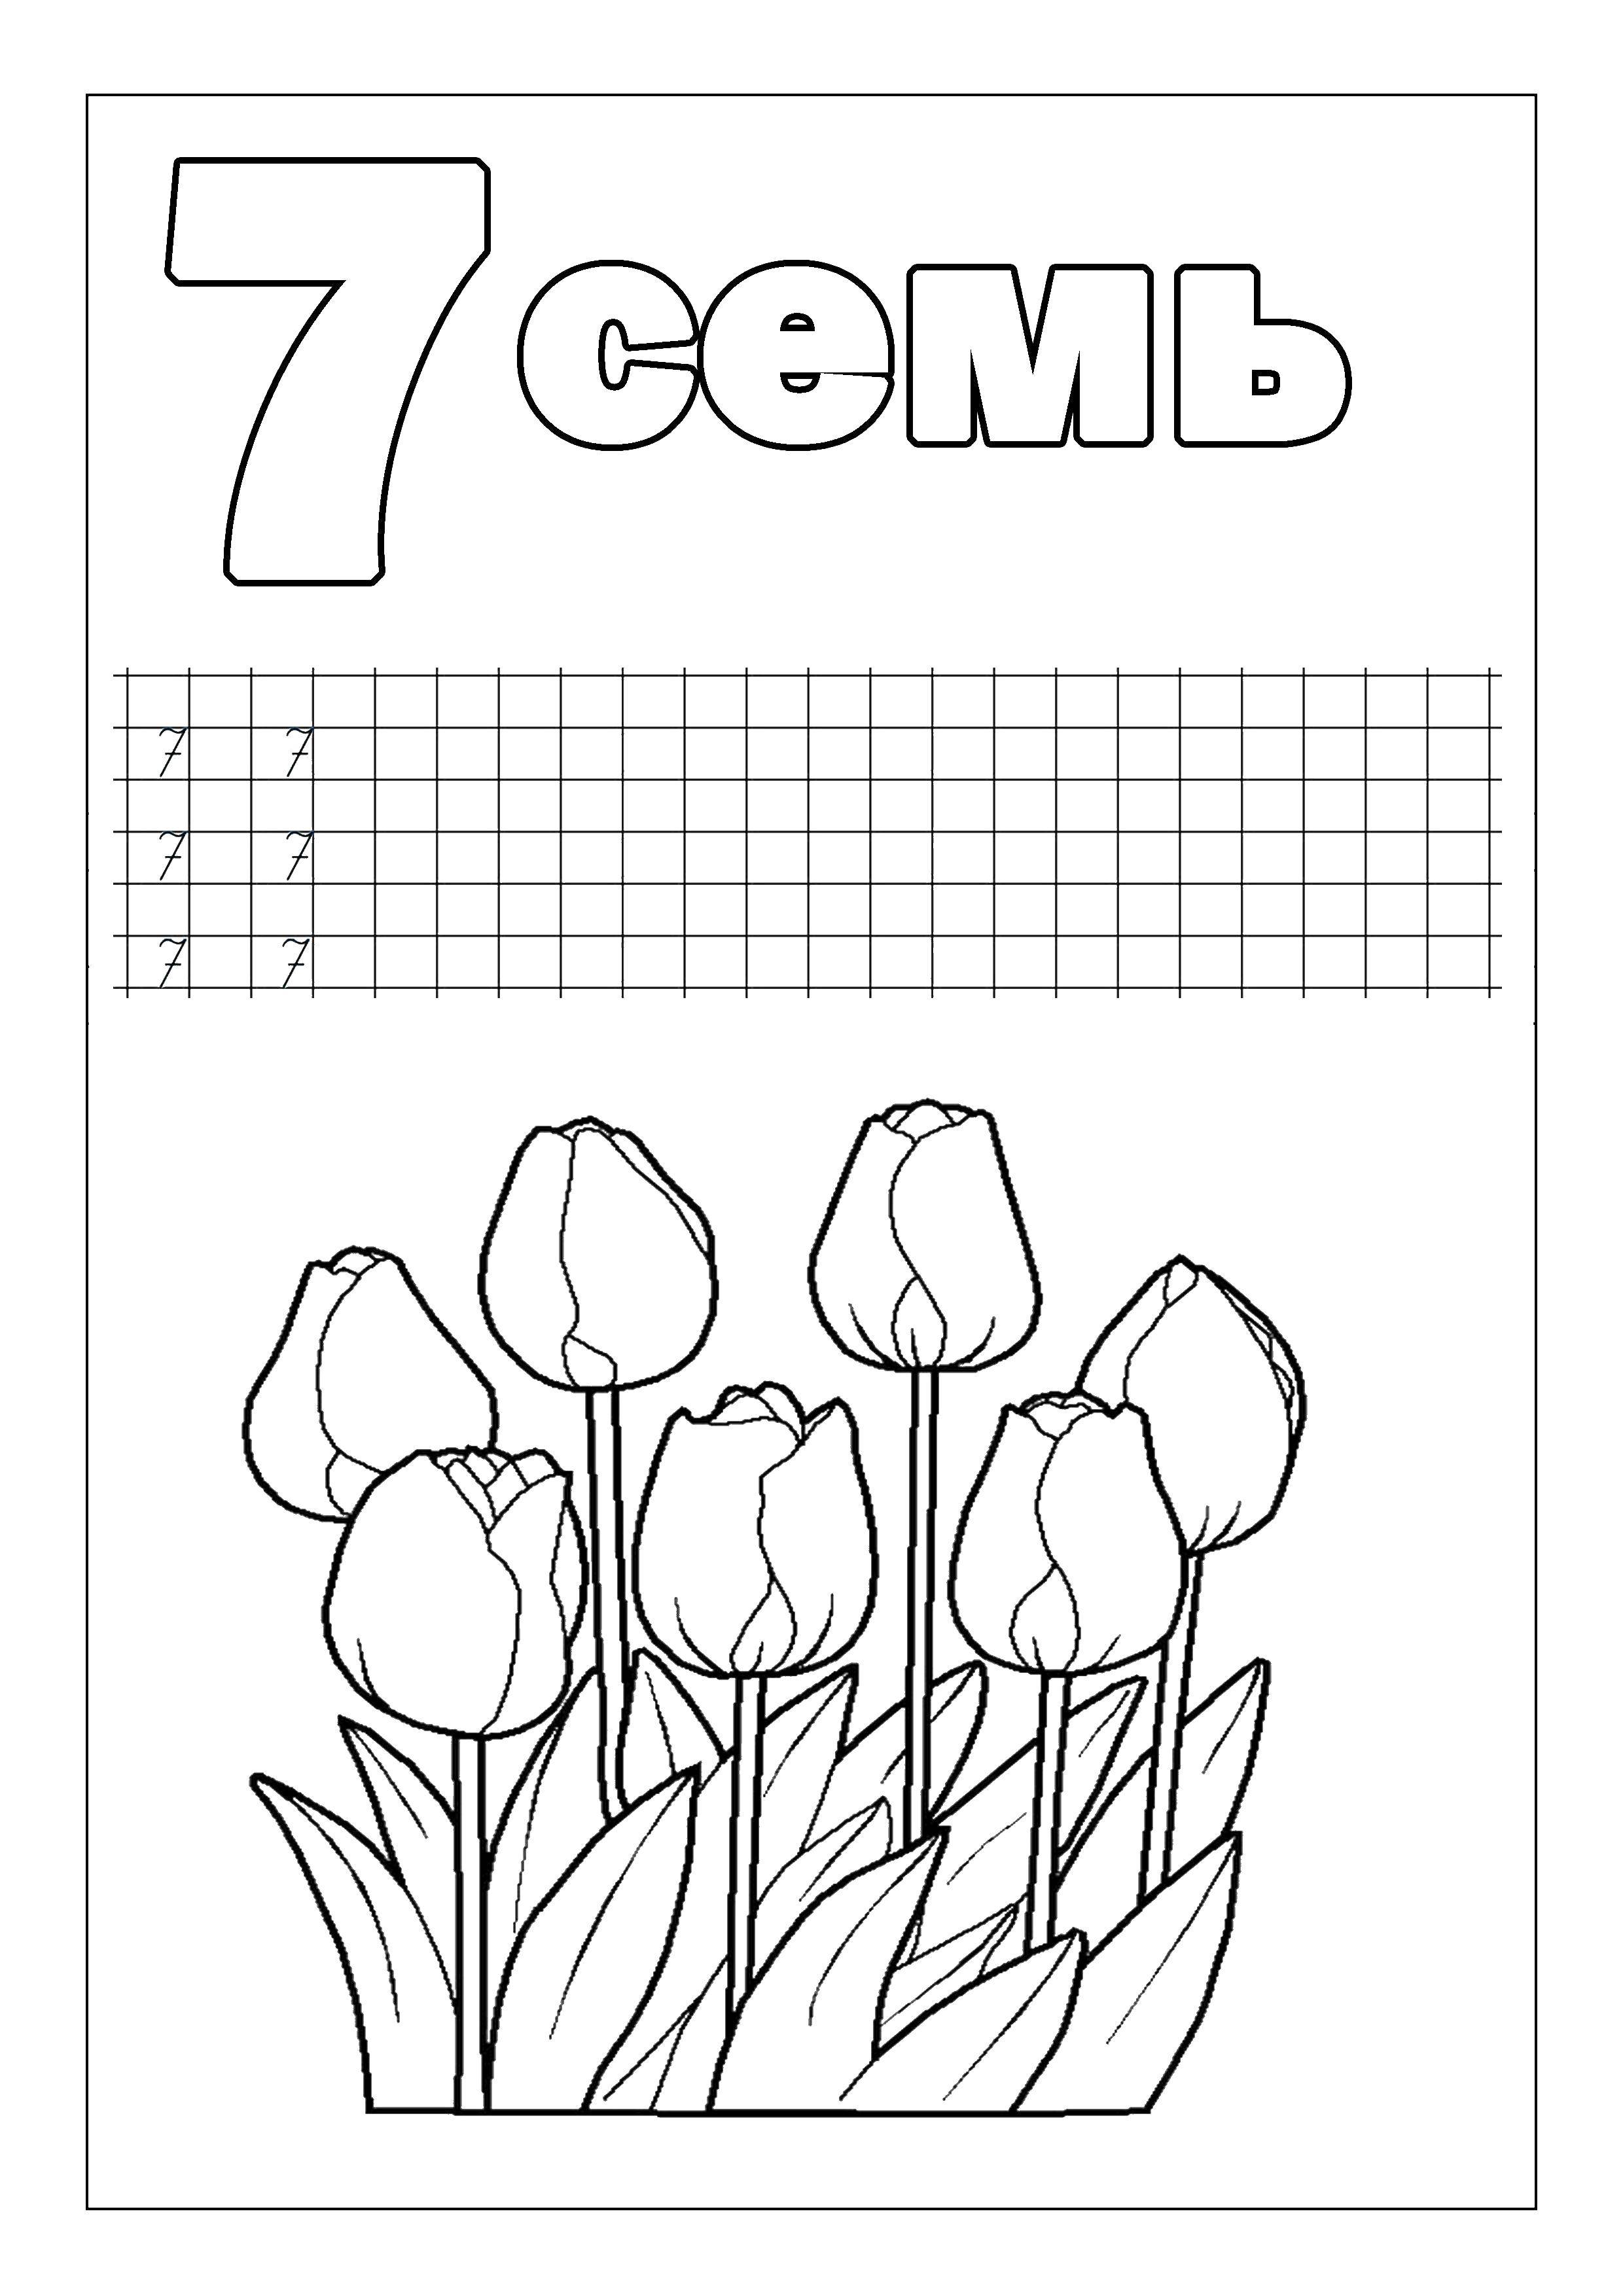 Coloring Font numbers 7. Category tracing numbers. Tags:  recipe, 7, figure, tulips.